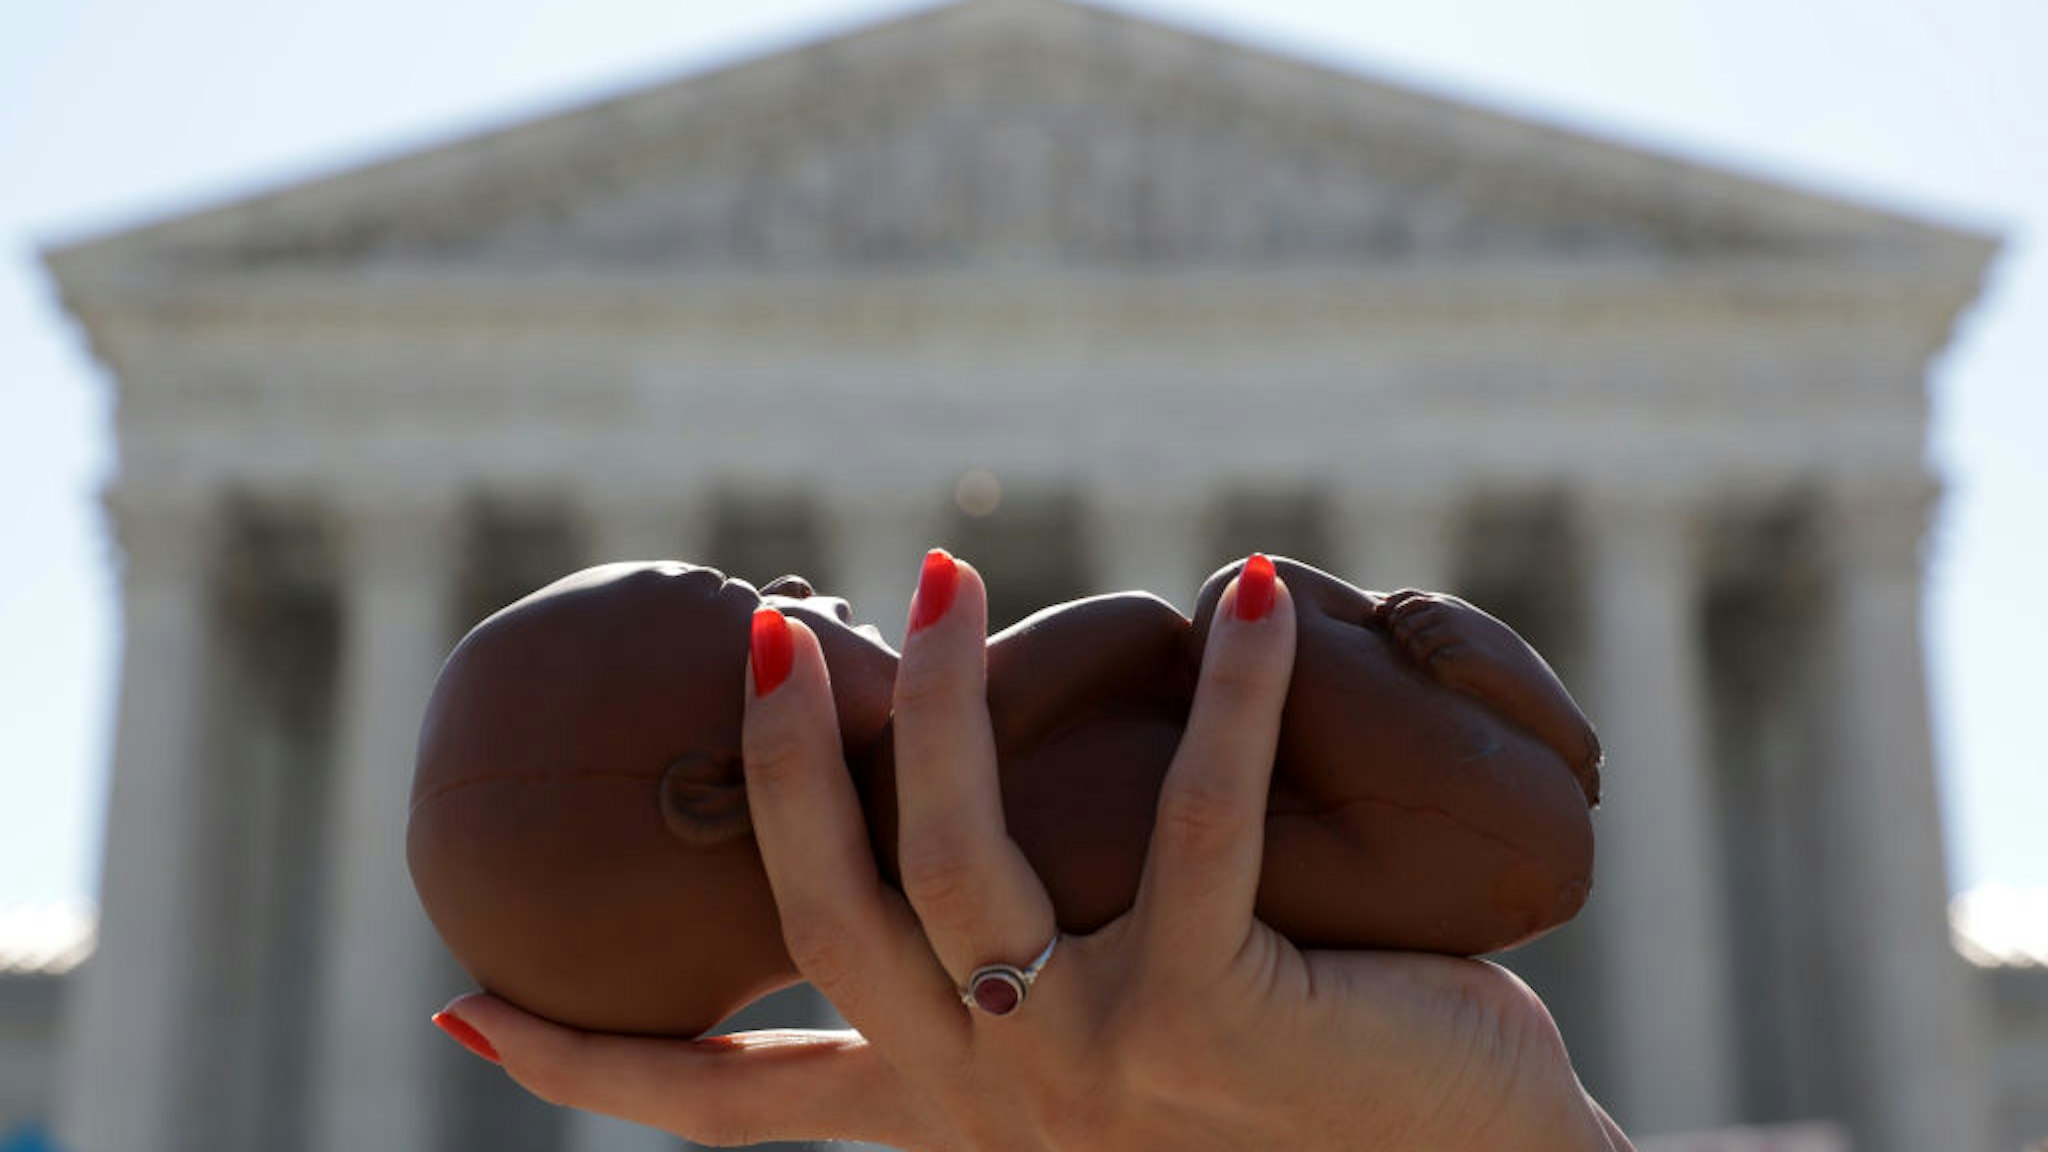 WASHINGTON, DC - JUNE 29: A pro-life activist holds a model fetus during a demonstration in front of the U.S. Supreme Court June 29, 2020 in Washington, DC. The Supreme Court has ruled today, in a 5-4 decision, a Louisiana law that required abortion doctors need admitting privileges to nearby hospitals unconstitutional. (Photo by Alex Wong/Getty Images)